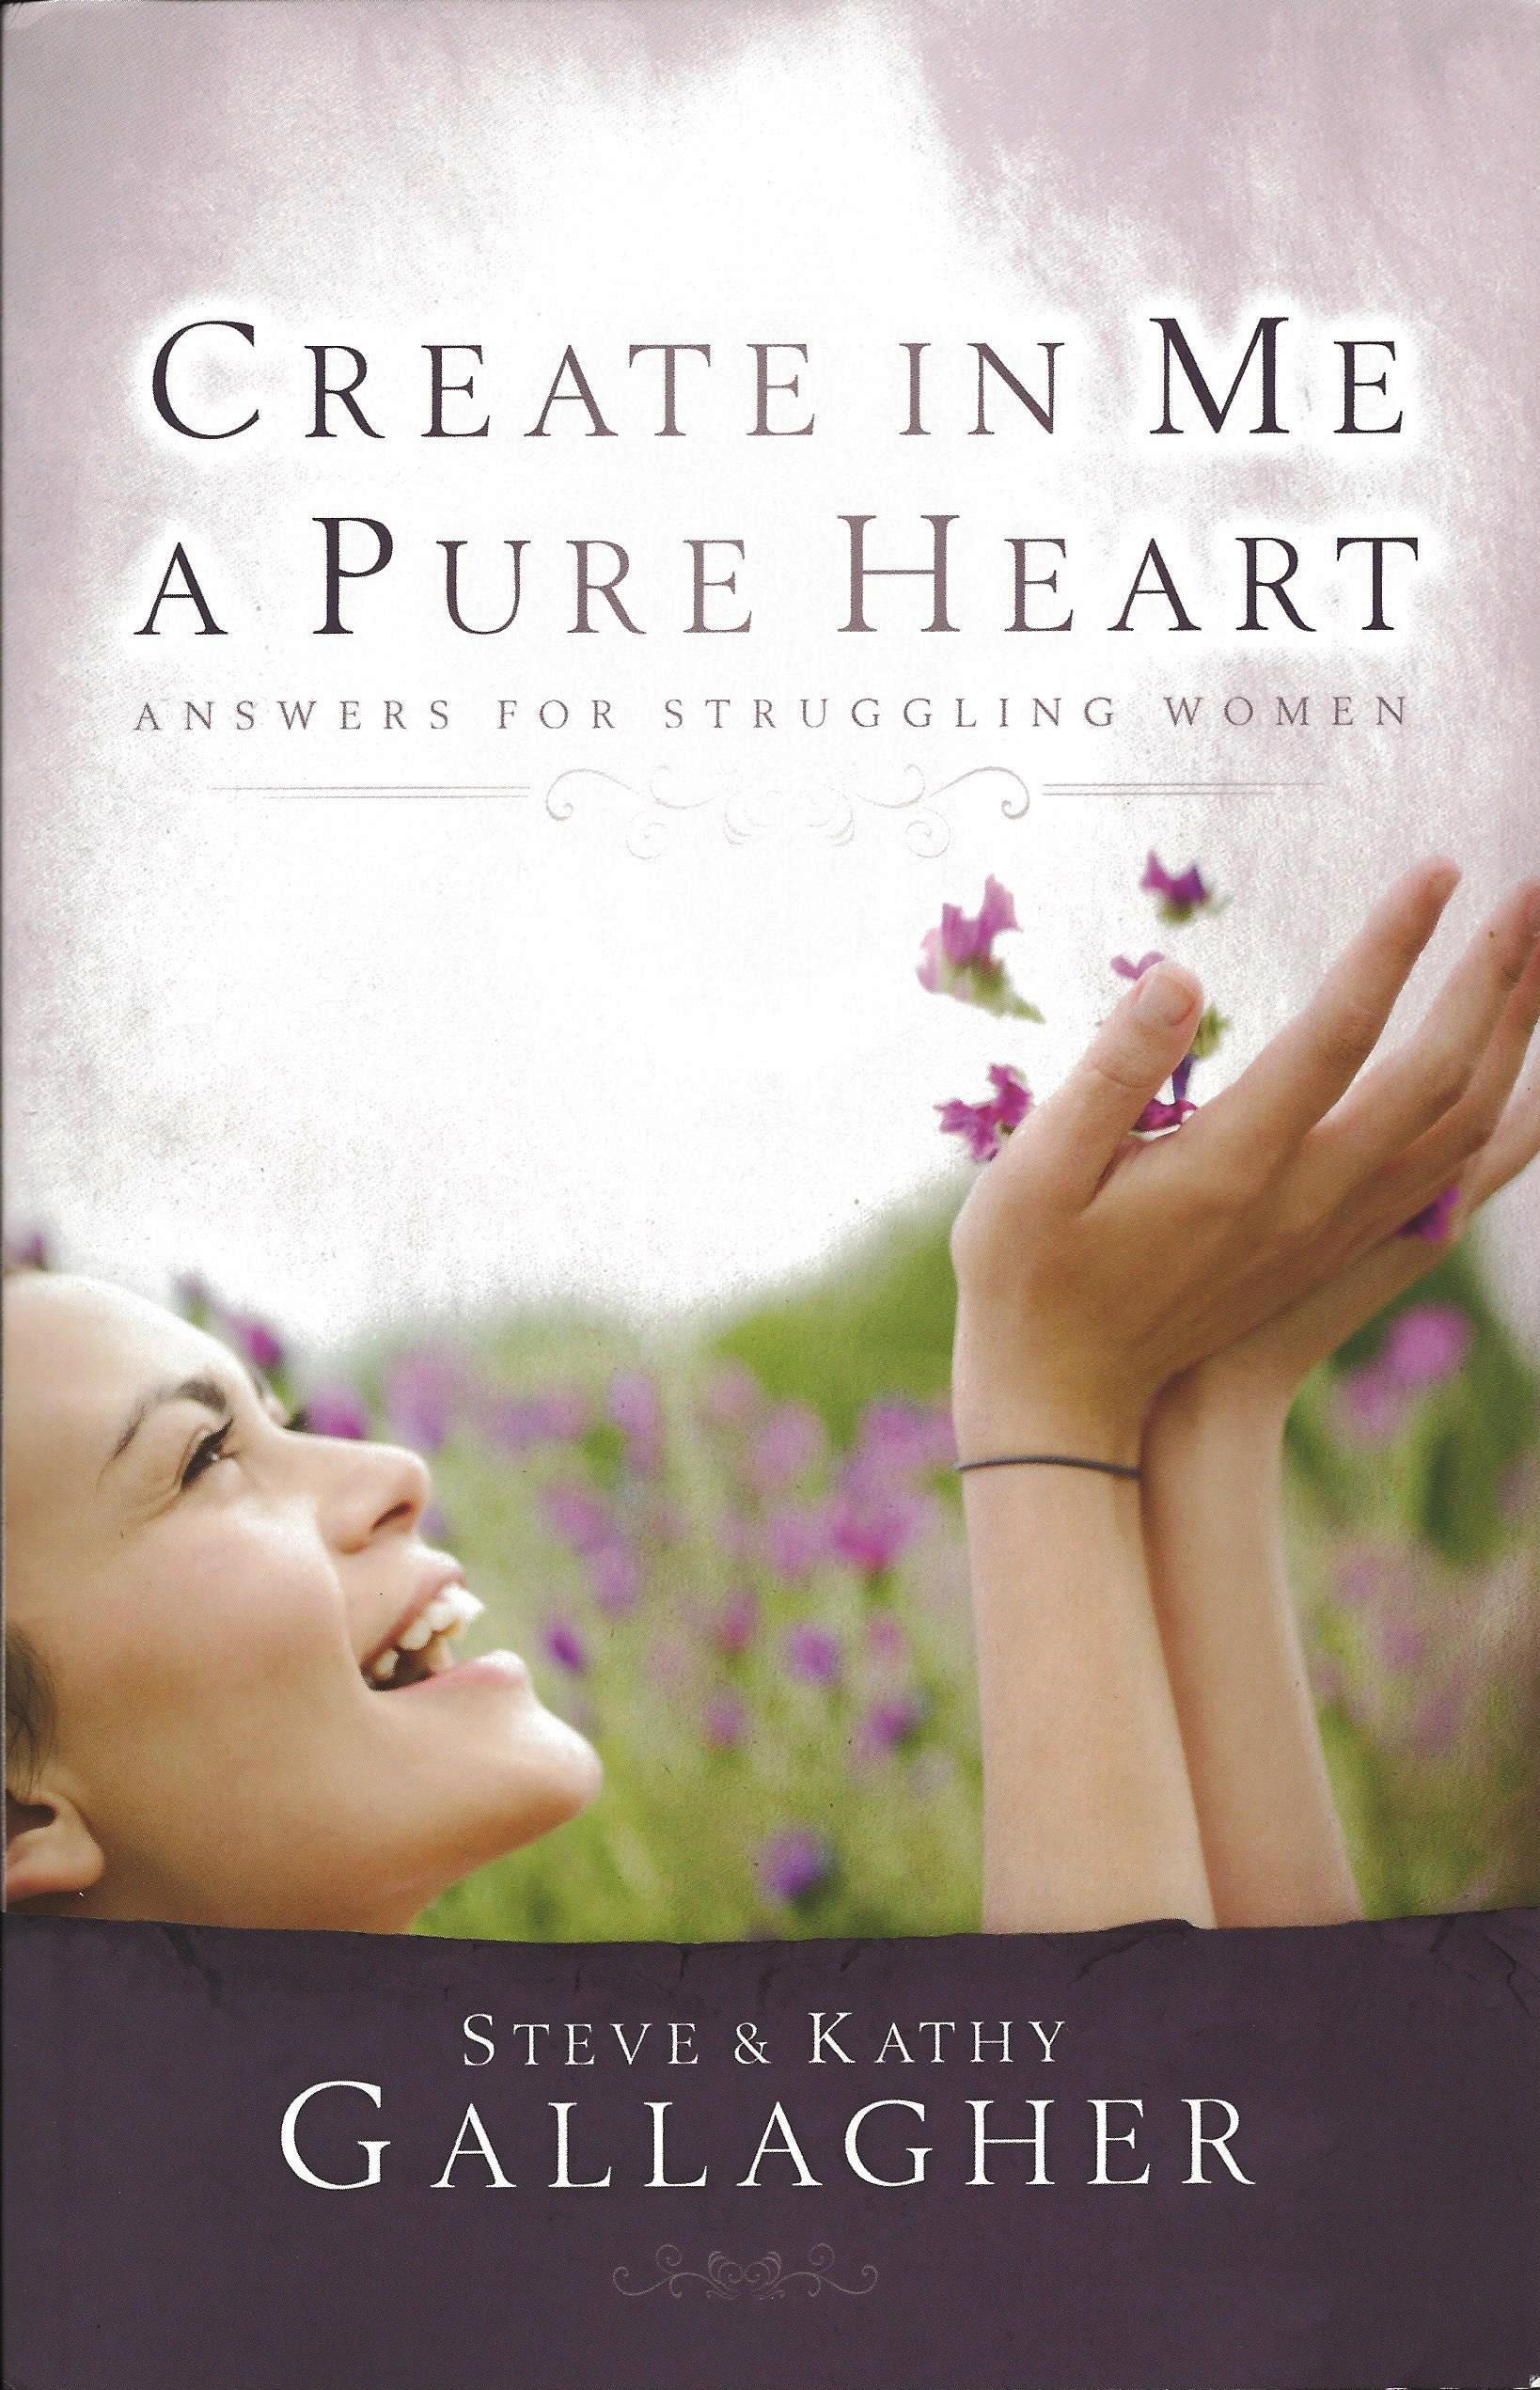 CREATE IN ME A PURE HEART Steve & Kathy Gallagher